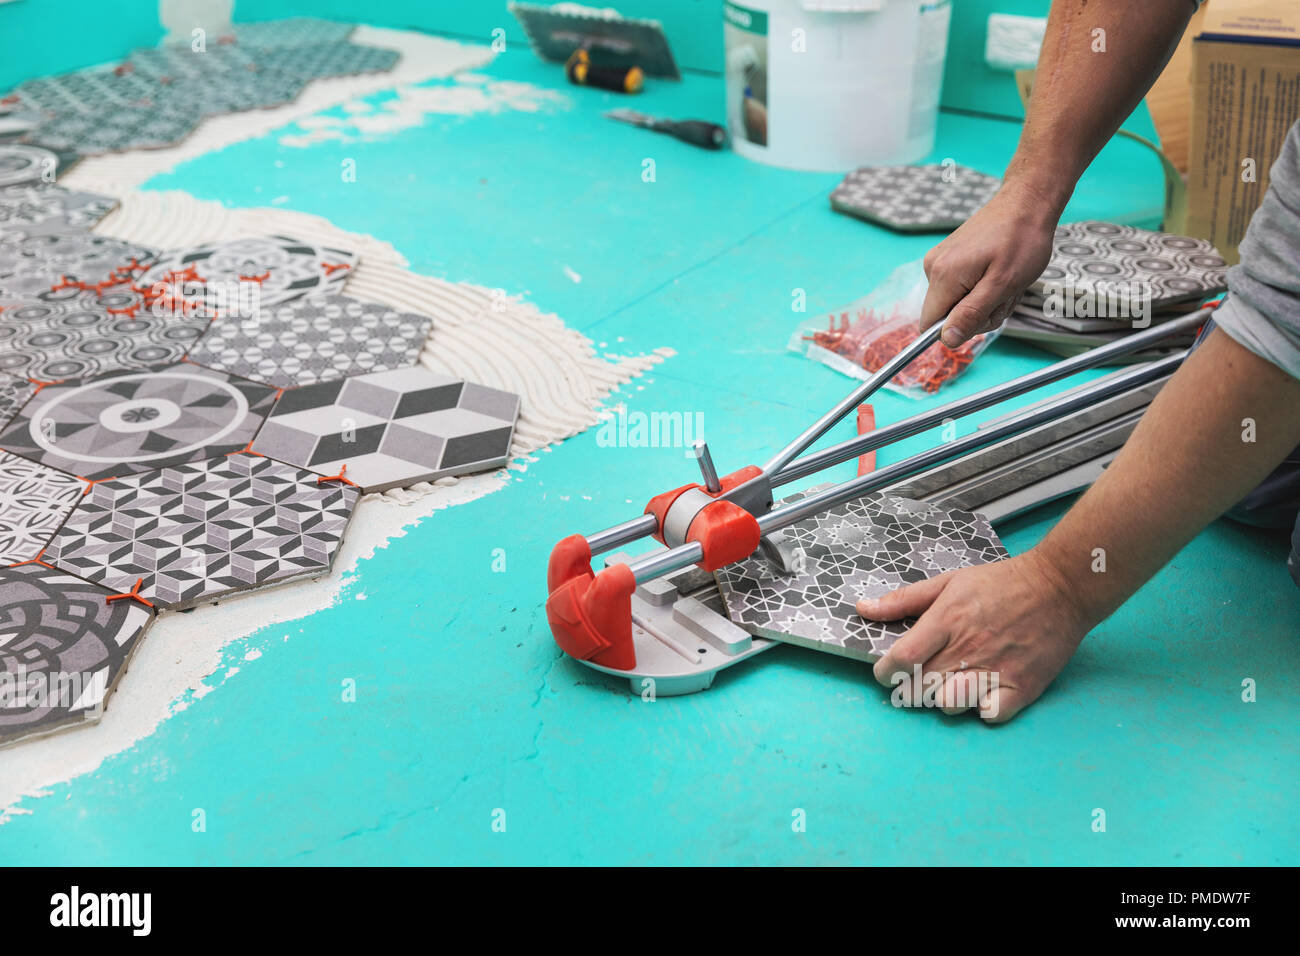 tiler cutting tile with cutter Stock Photo